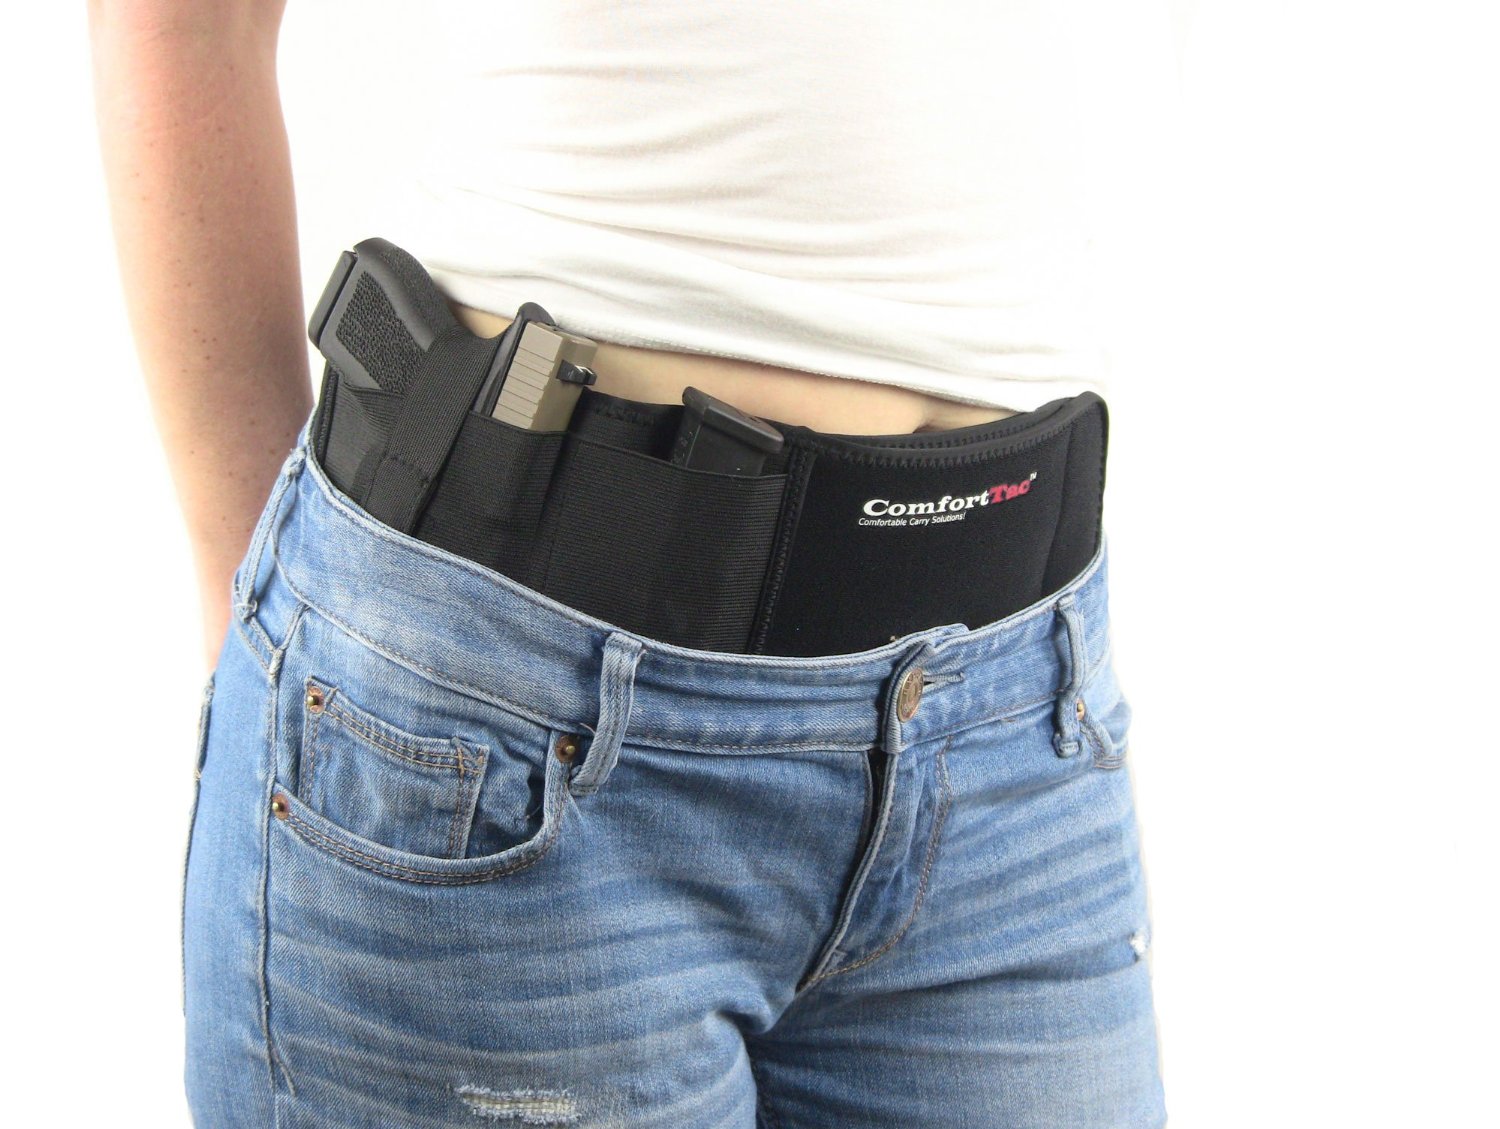 Top 5 Best Belly Band Holsters: Belly Band Concealment Holster Reviews ...